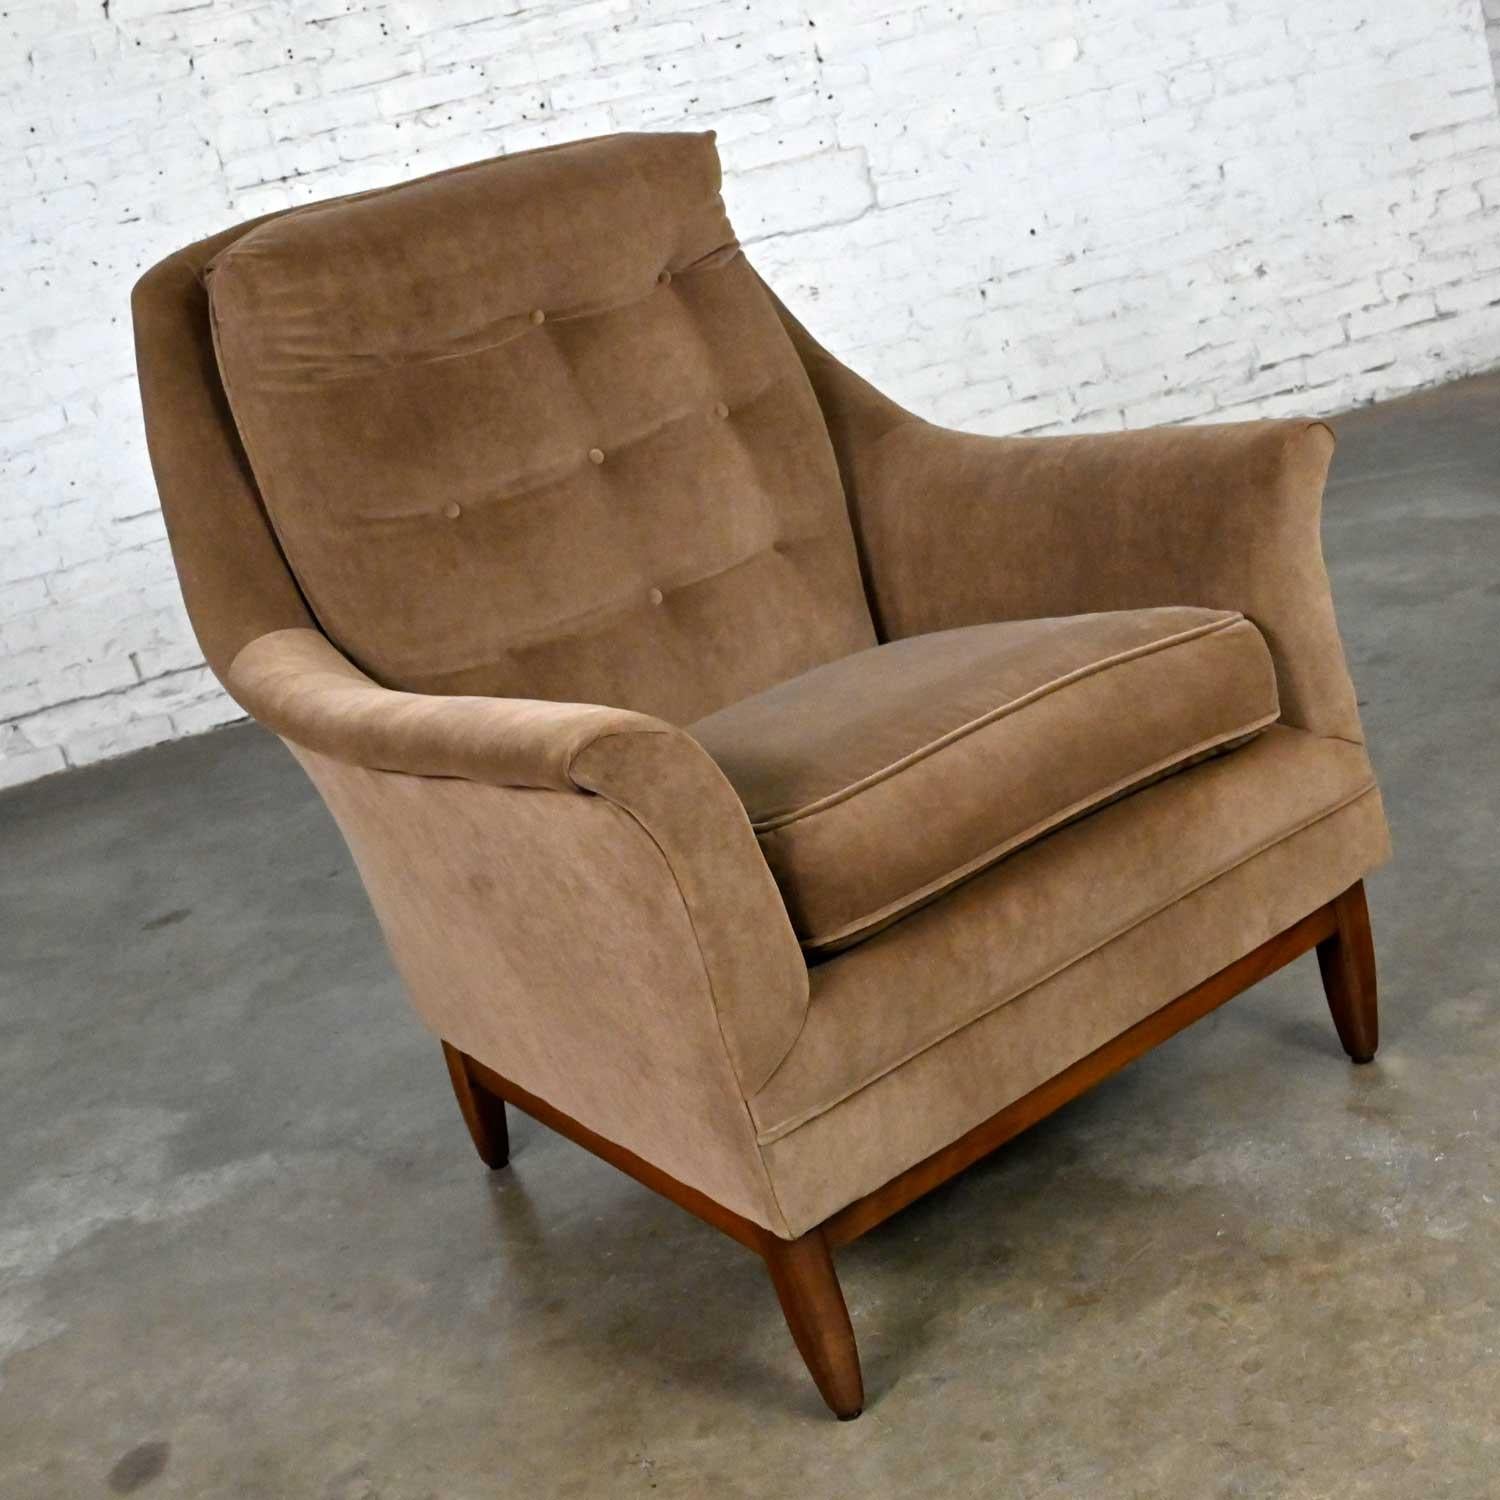 Wonderful vintage Mid-Century Modern mocha colored velvet club or lounge chair in the style of Dunbar. Beautiful condition, keeping in mind that this is vintage and not new so will have signs of use and wear. There are a few spots and